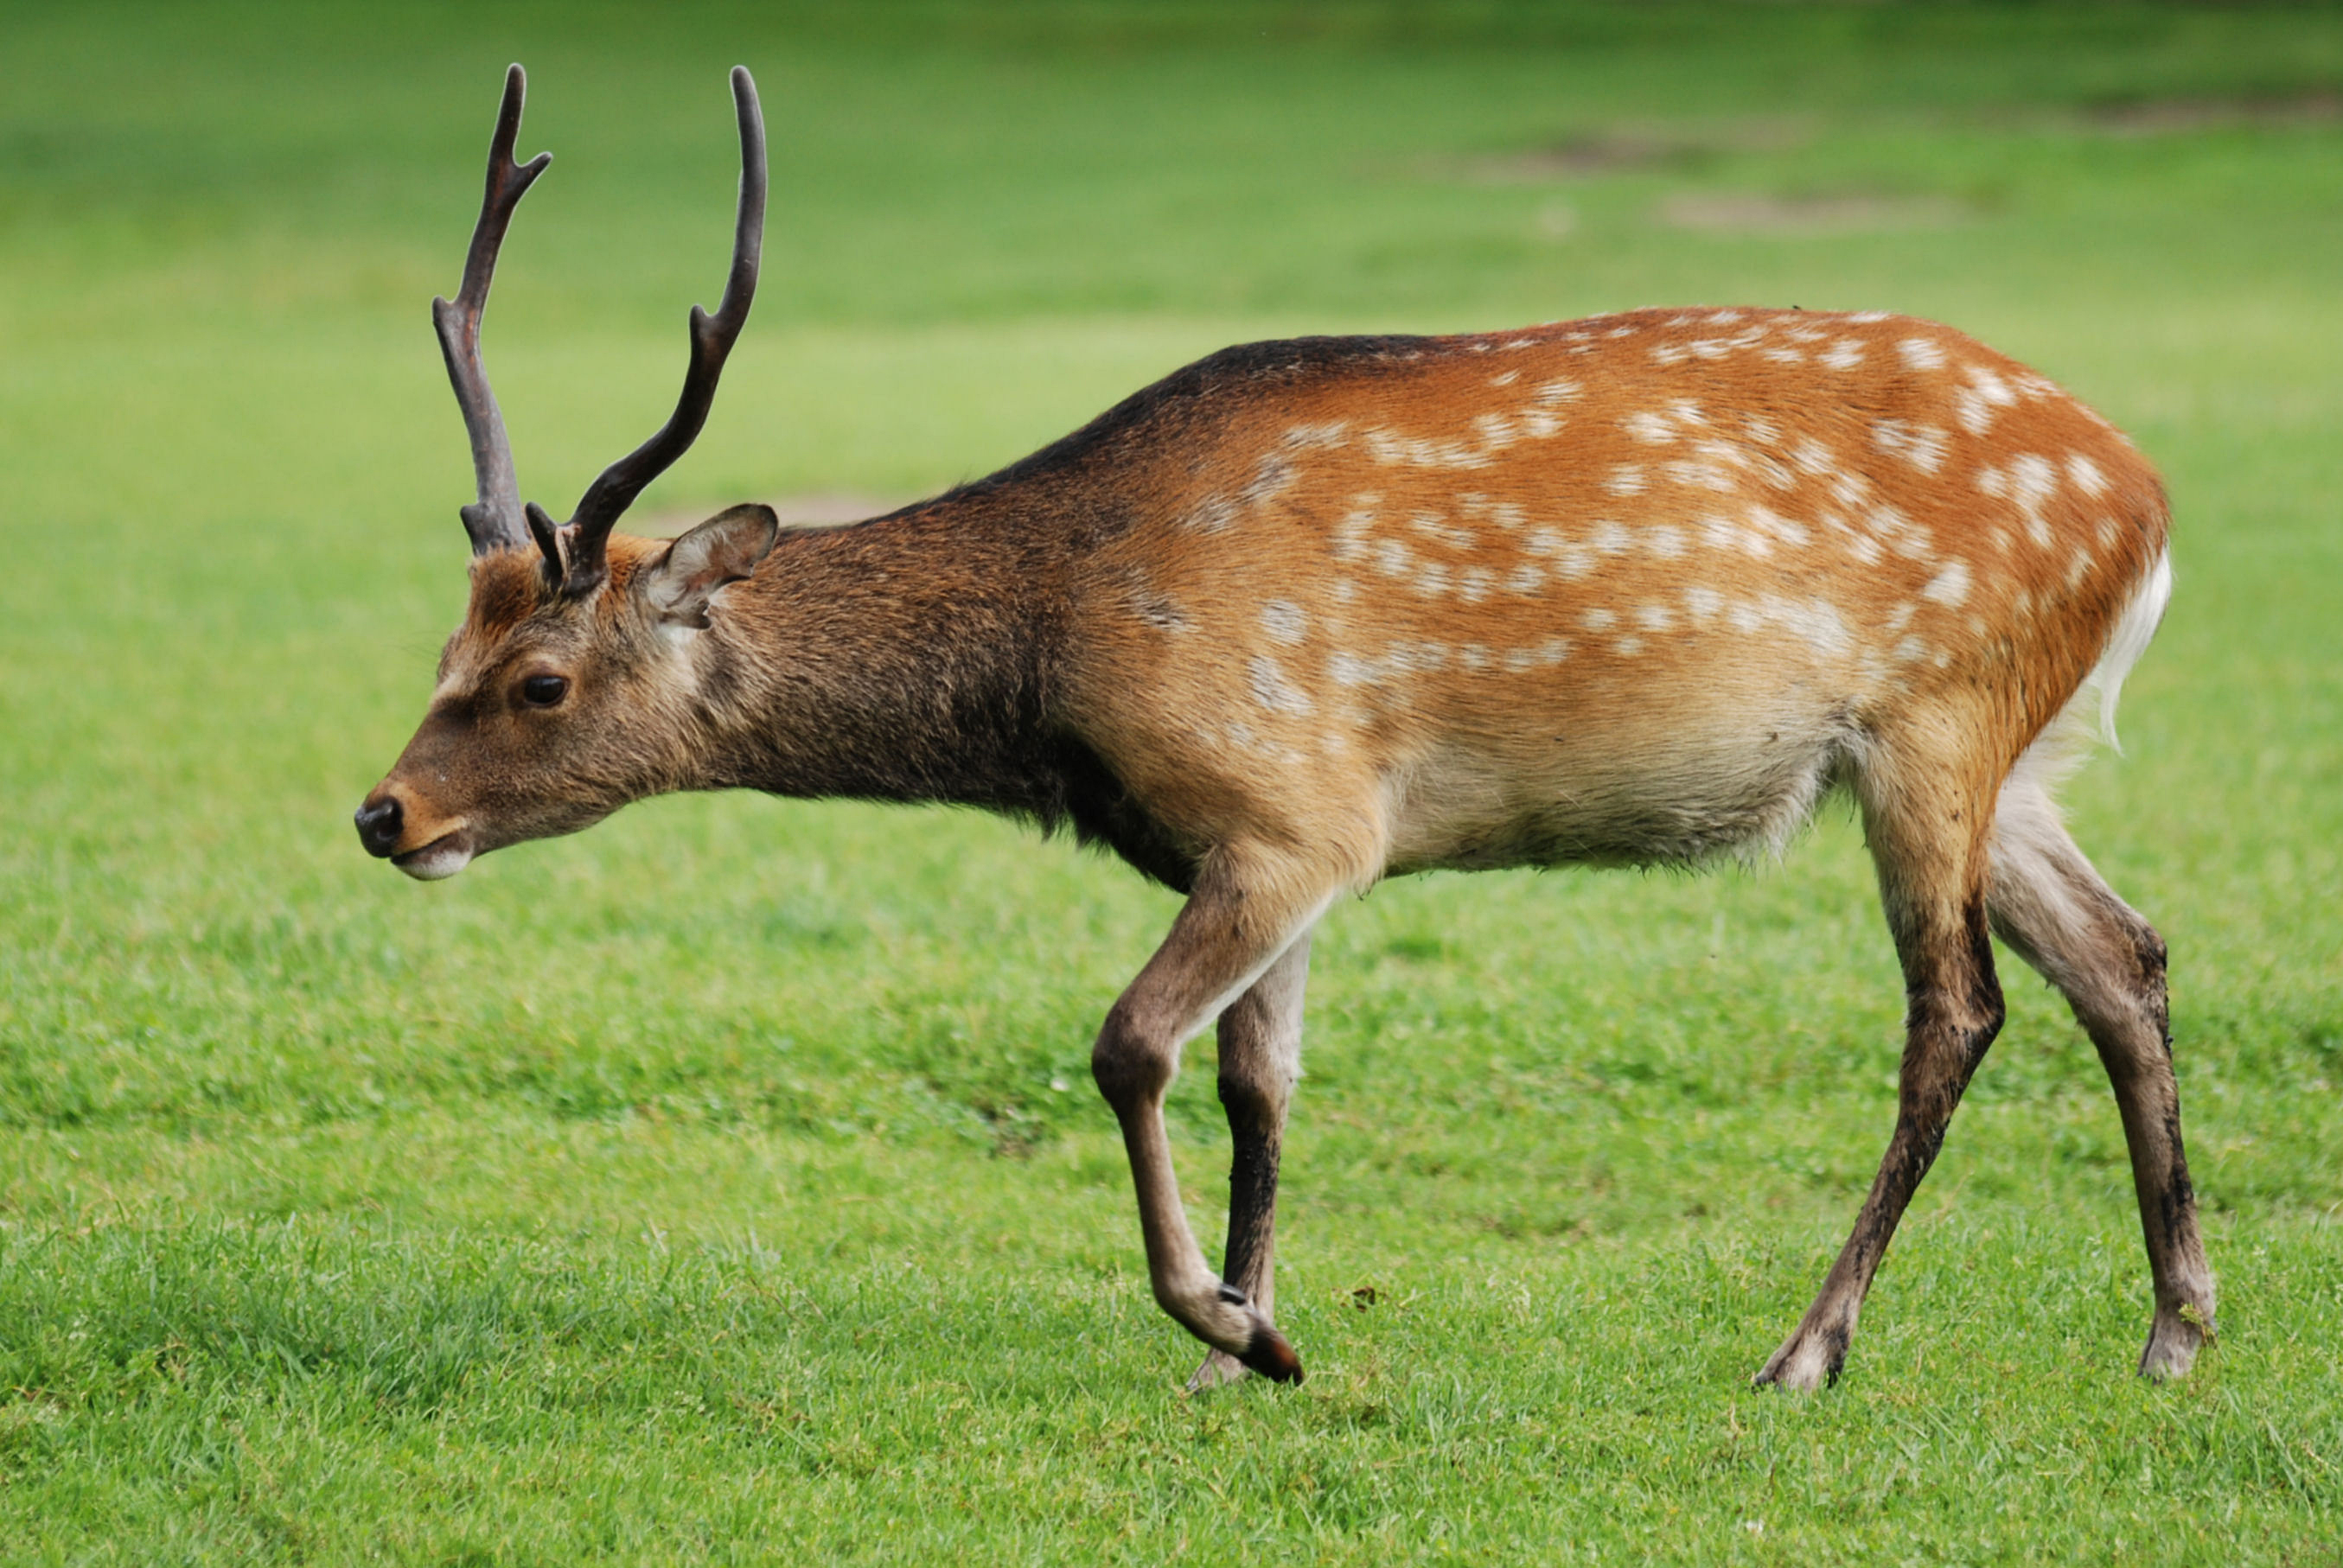 What kind of antlers do sika deer have?